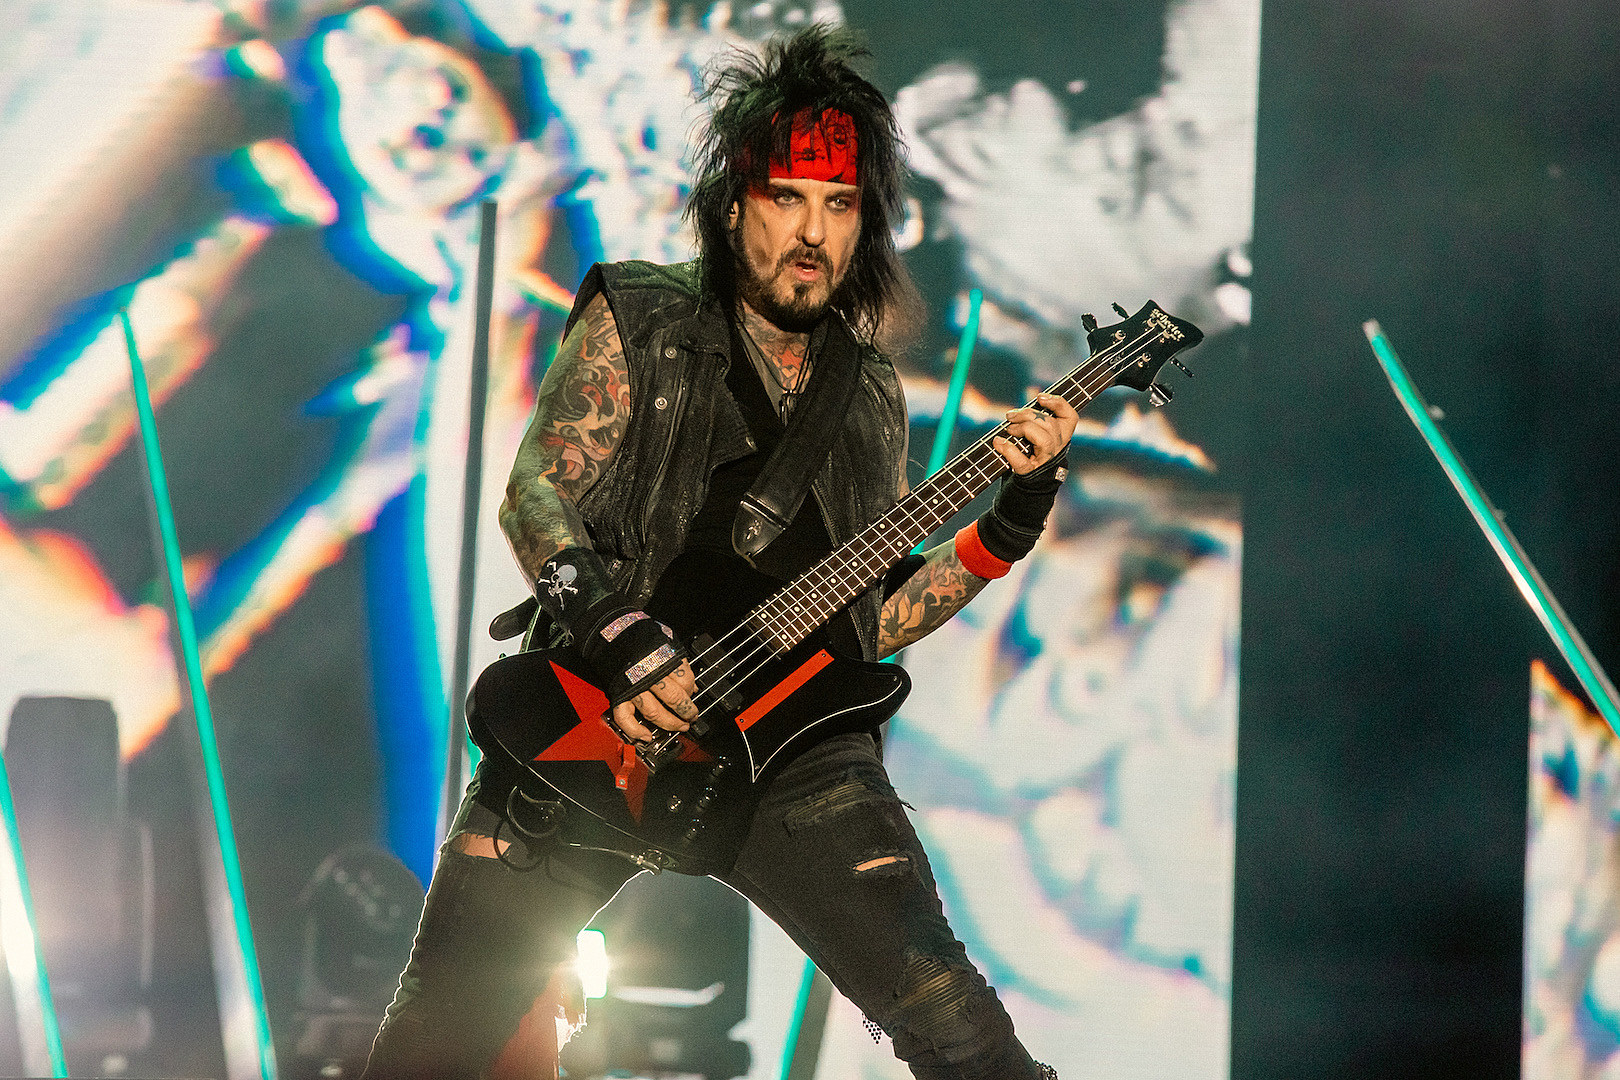 NIKKI SIXX SAYS MOTLEY CRUE'S SONG LIVE WIRE IS ABOUT DOMESTIC VIOLENCE